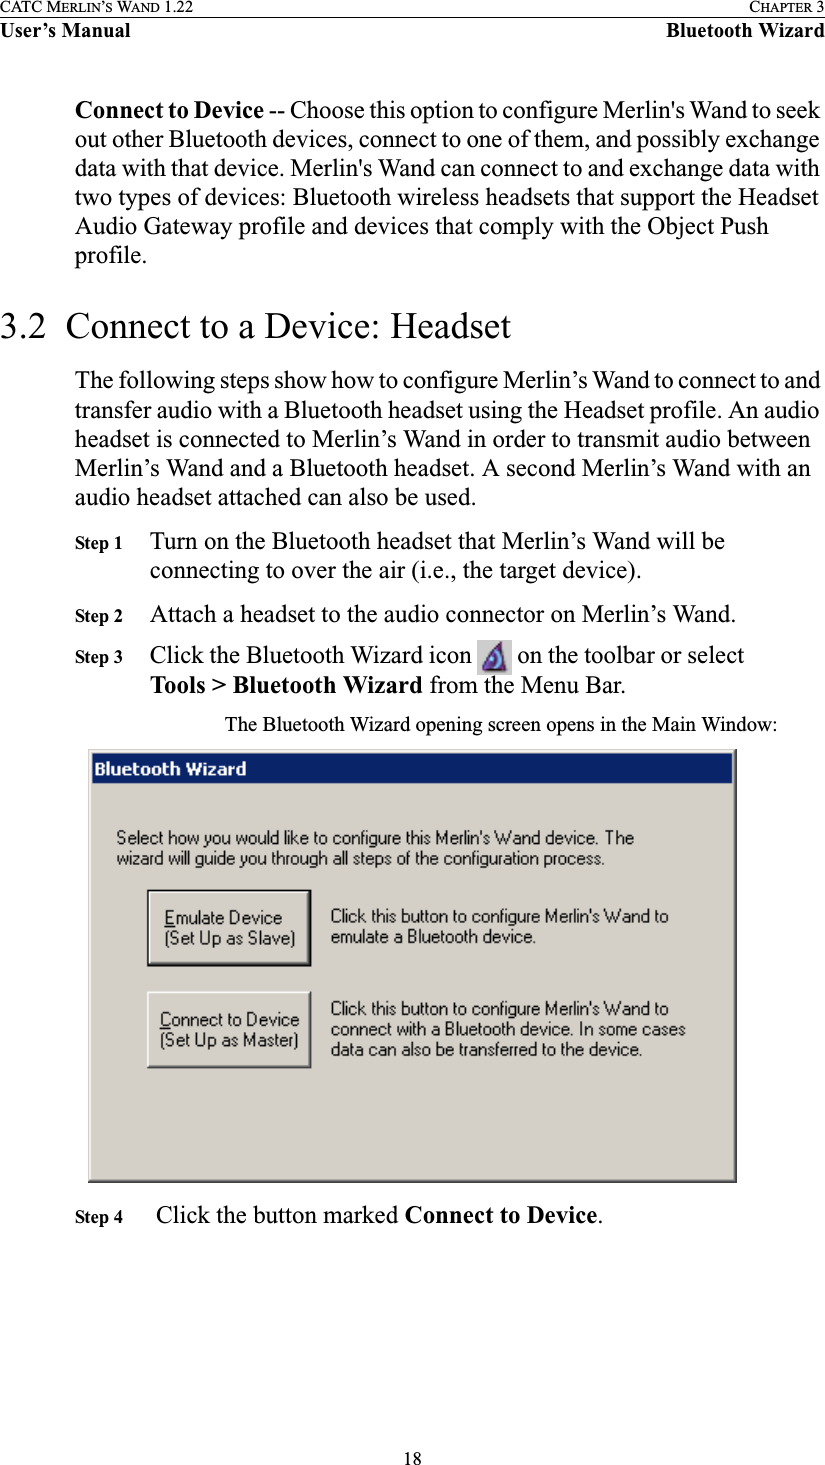 18CATC MERLIN’S WAND 1.22 CHAPTER 3User’s Manual Bluetooth WizardConnect to Device -- Choose this option to configure Merlin&apos;s Wand to seek out other Bluetooth devices, connect to one of them, and possibly exchange data with that device. Merlin&apos;s Wand can connect to and exchange data with two types of devices: Bluetooth wireless headsets that support the Headset Audio Gateway profile and devices that comply with the Object Push profile.3.2  Connect to a Device: HeadsetThe following steps show how to configure Merlin’s Wand to connect to and transfer audio with a Bluetooth headset using the Headset profile. An audio headset is connected to Merlin’s Wand in order to transmit audio between Merlin’s Wand and a Bluetooth headset. A second Merlin’s Wand with an audio headset attached can also be used.Step 1 Turn on the Bluetooth headset that Merlin’s Wand will be connecting to over the air (i.e., the target device).Step 2 Attach a headset to the audio connector on Merlin’s Wand.Step 3 Click the Bluetooth Wizard icon   on the toolbar or select Tools &gt; Bluetooth Wizard from the Menu Bar.The Bluetooth Wizard opening screen opens in the Main Window:Step 4  Click the button marked Connect to Device.